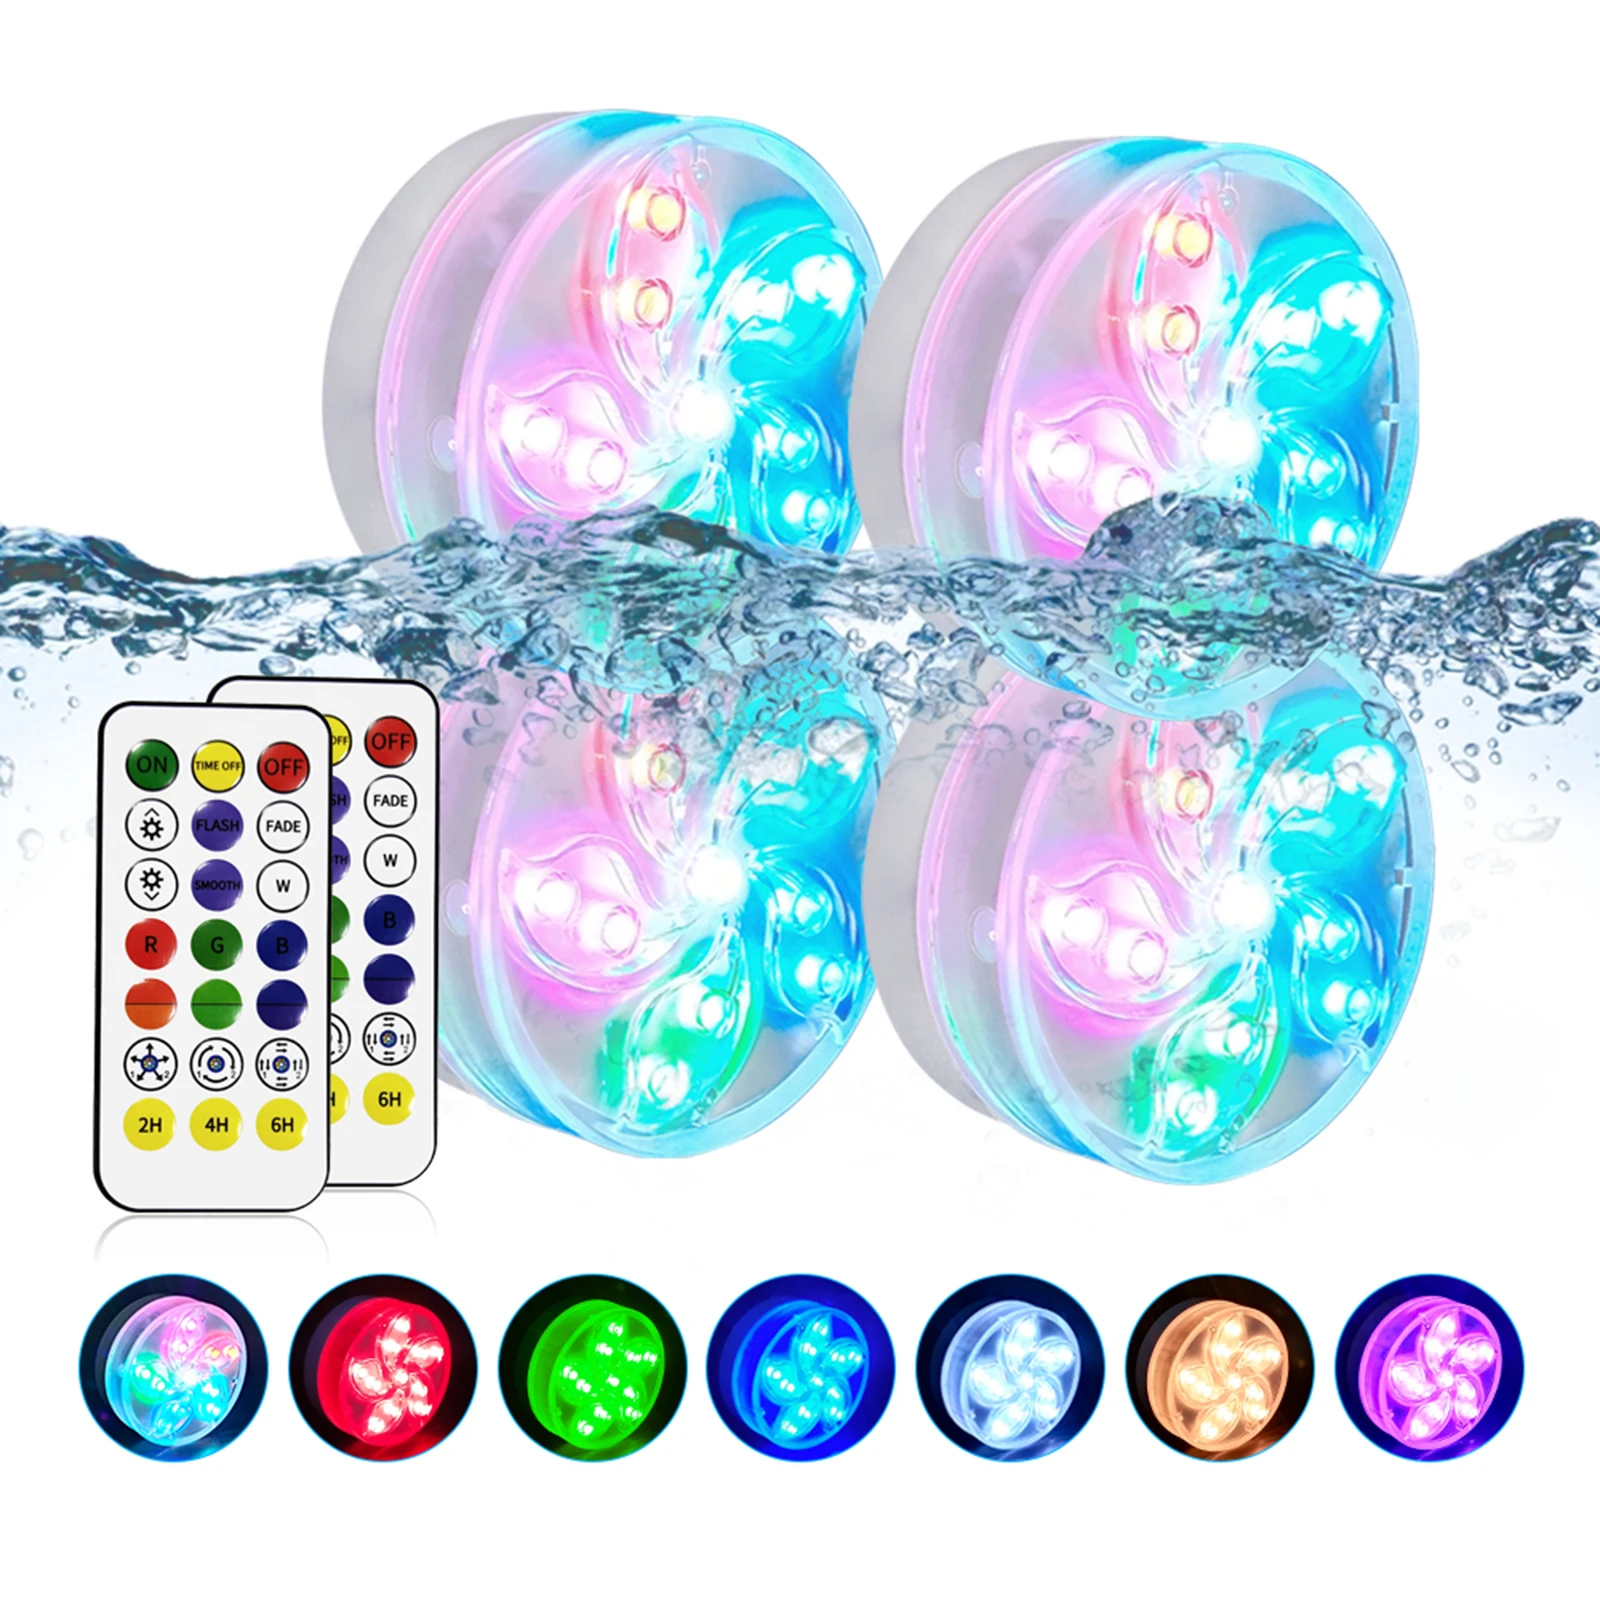 RGB Underwater Light 11 LED Remote Controlled IP68 Decoration Submersible Light for Fish Tank Lawn Outdoor Indoor Vase